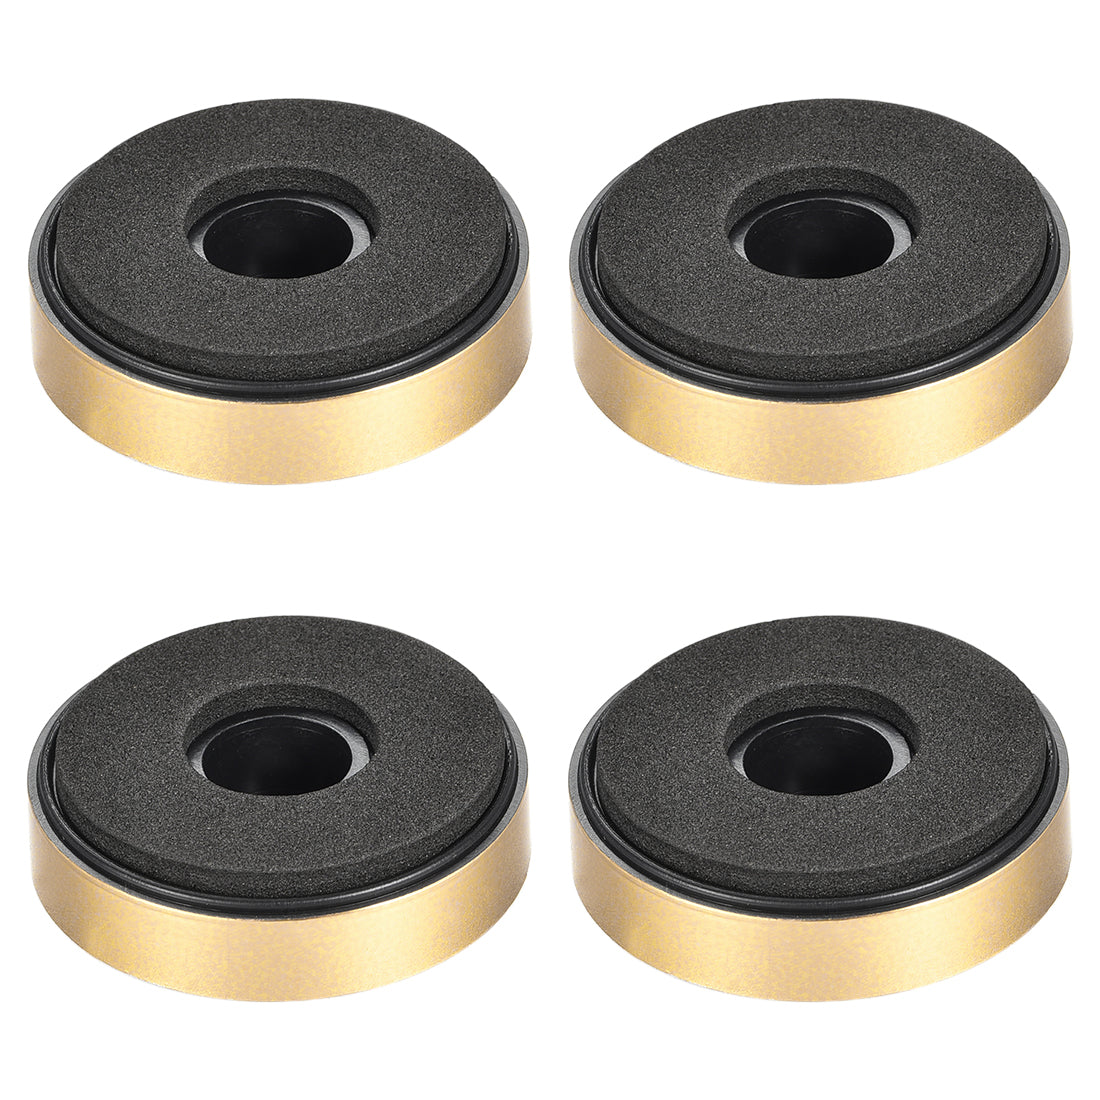 uxcell Uxcell 4 Pcs D40xH11.35mm Plastic Feet Anti-Vibration Base Pad Stand for Speaker Guitar Amplifier HiFi Gold Tone